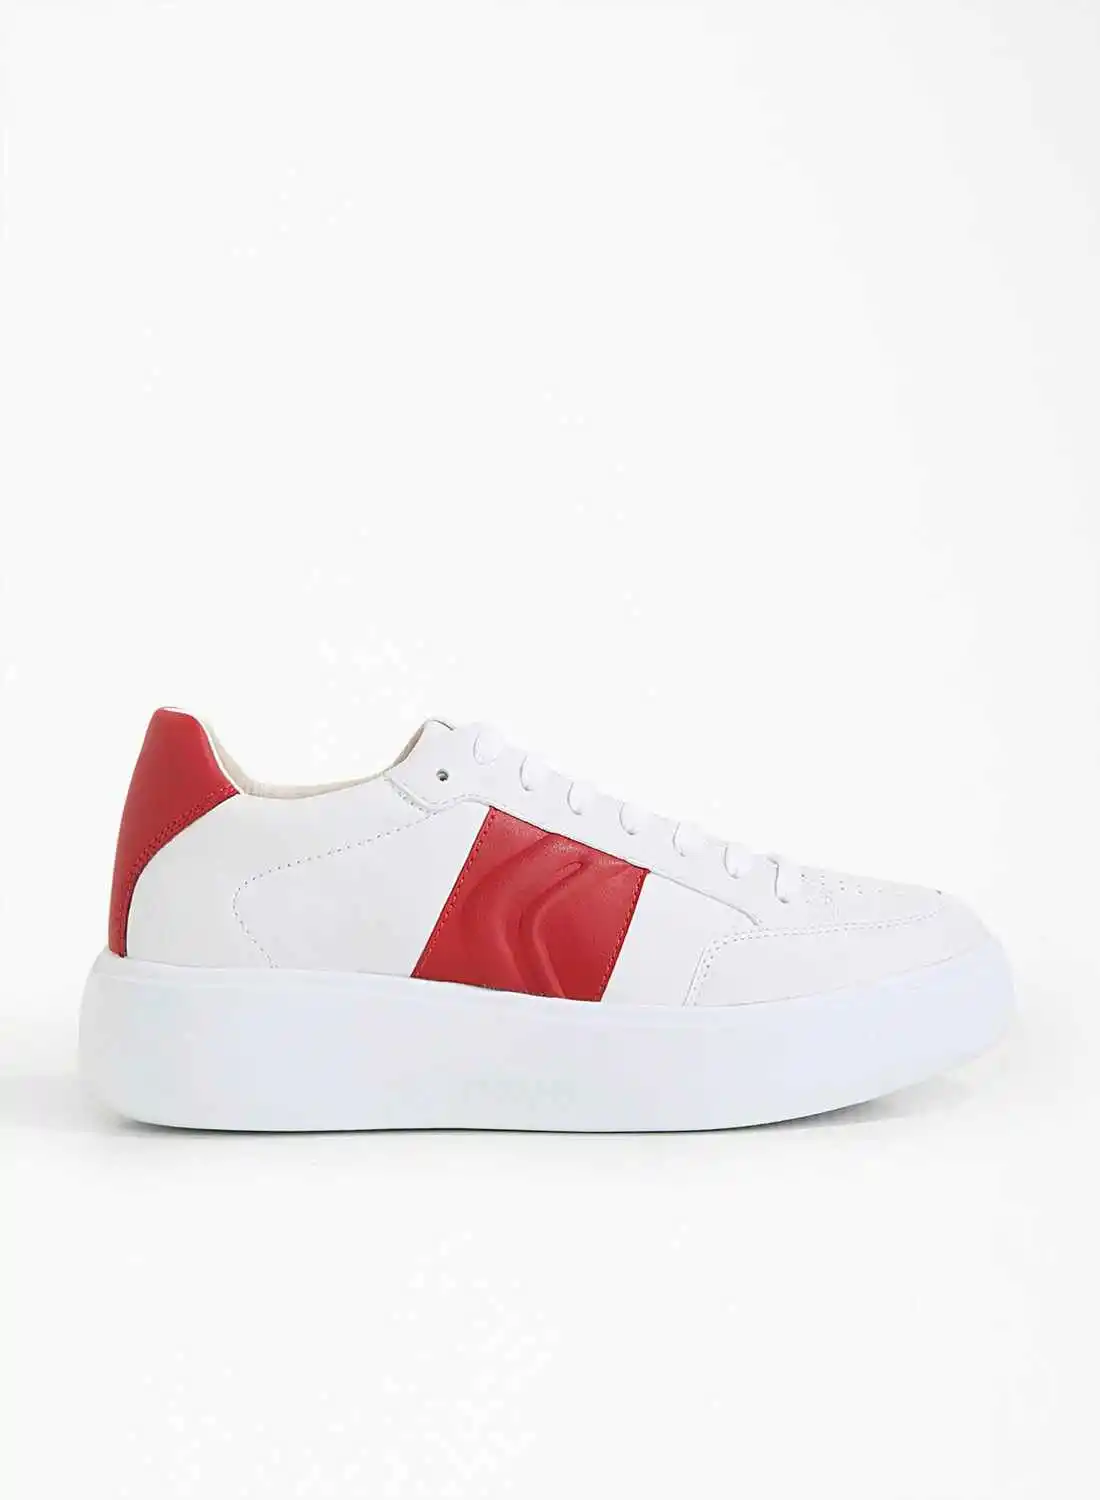 GEOX Everyday Wear Sneakers White/Red